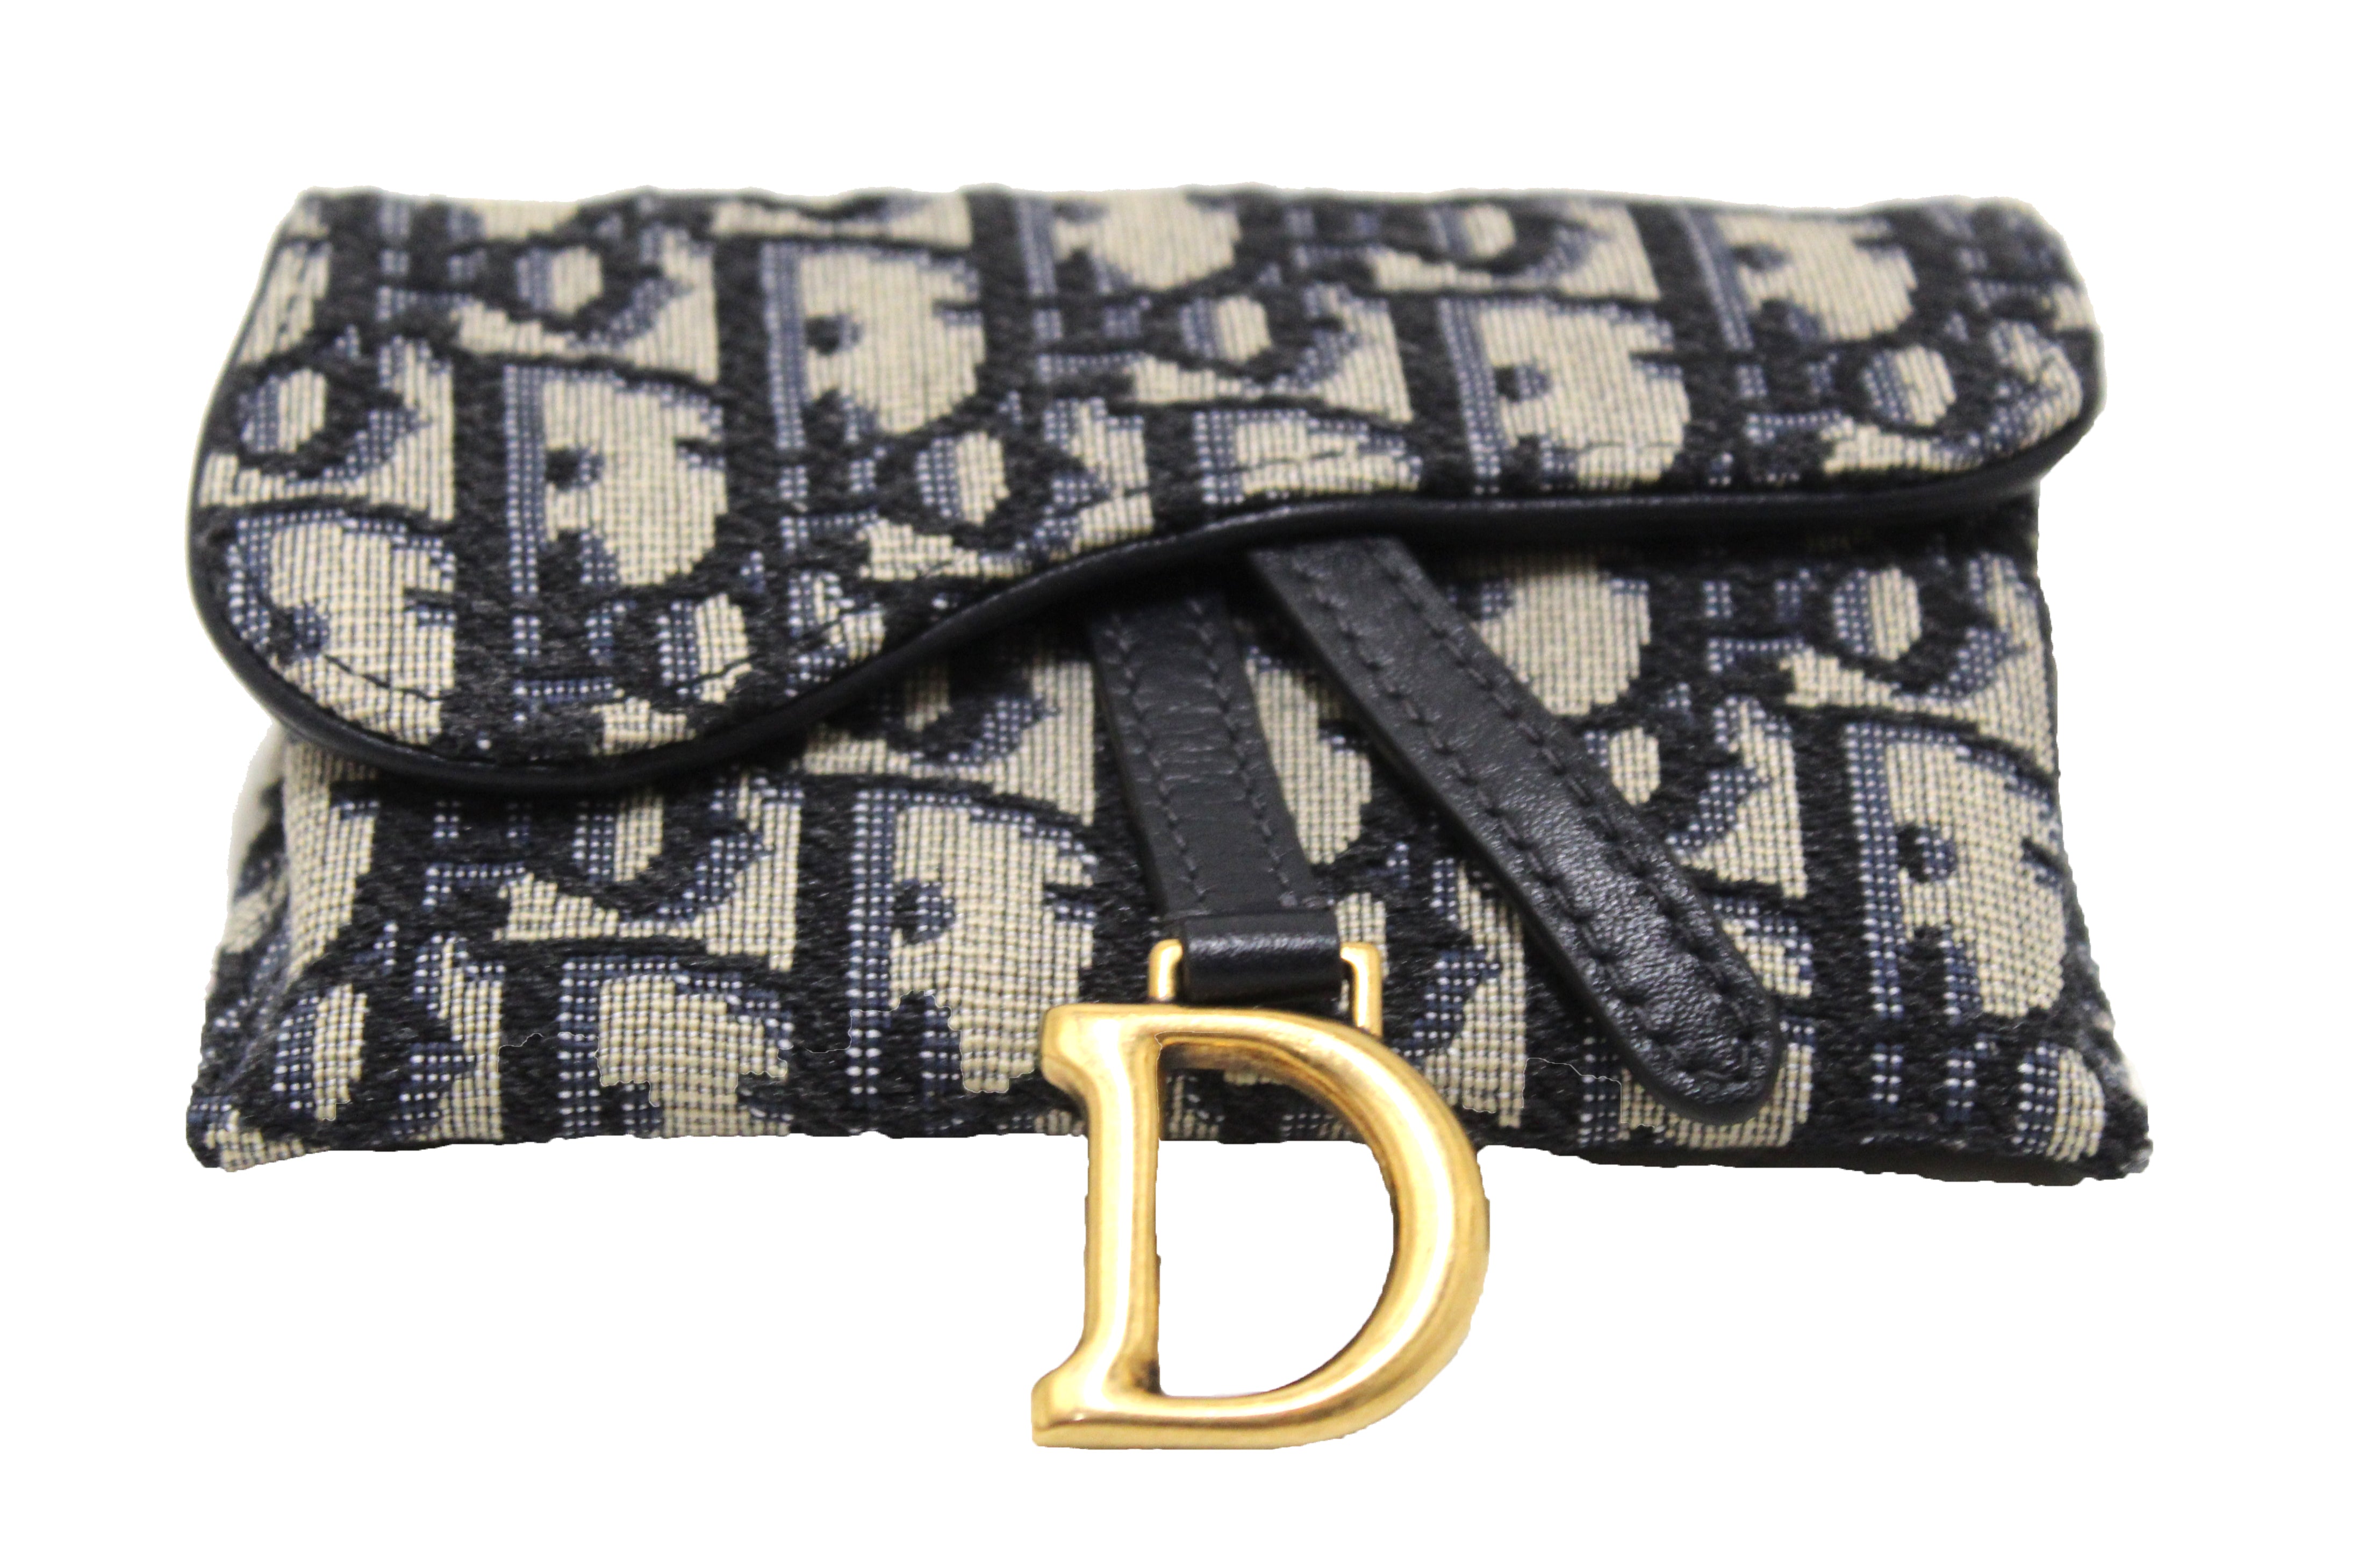 Shop for the Top Christian Dior Nano Saddle Chain Pouch Christian Dior